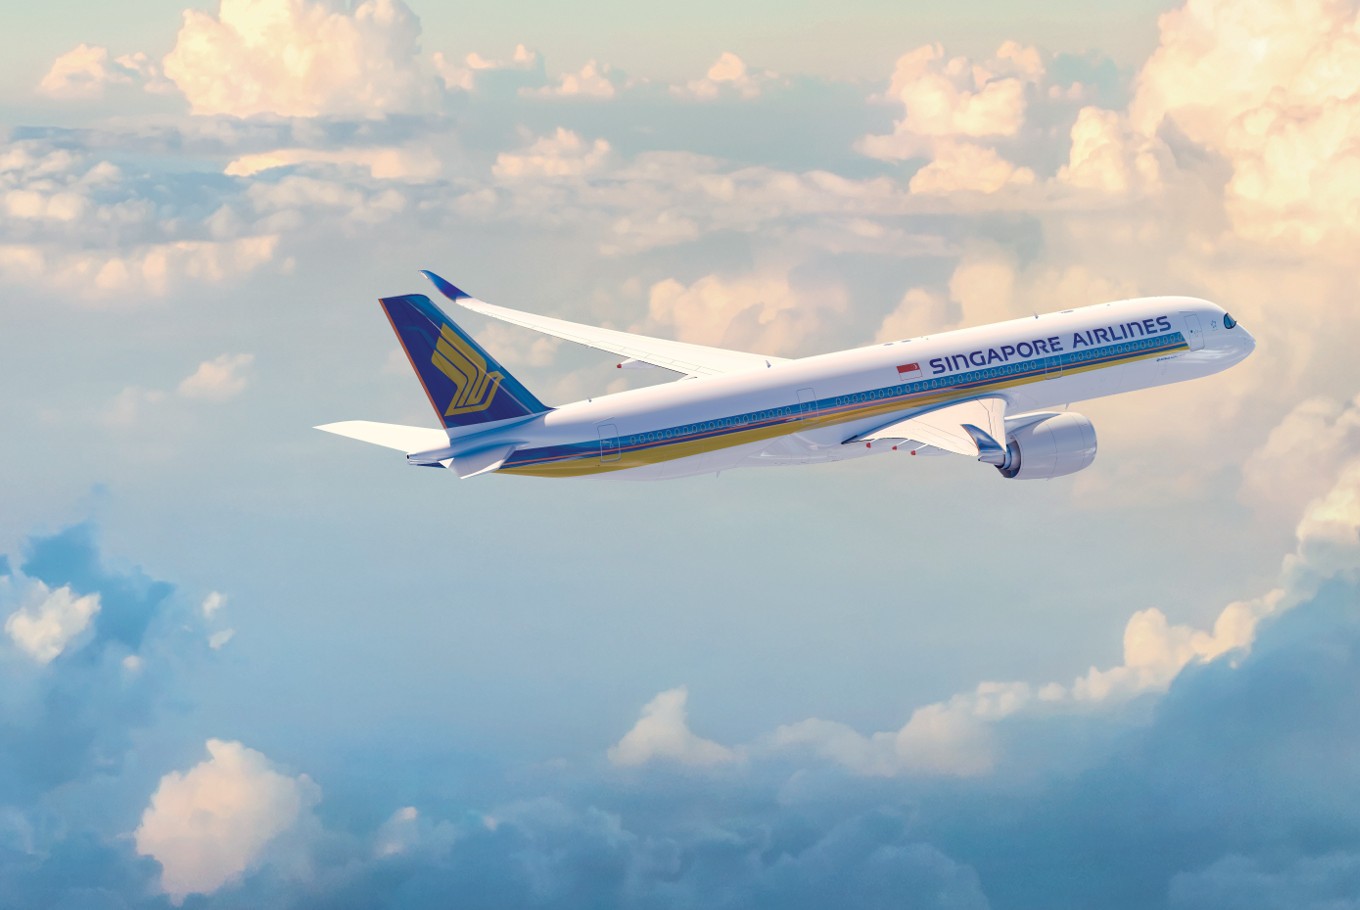 Singapore Airlines warns of phishing scam promising free plane tickets